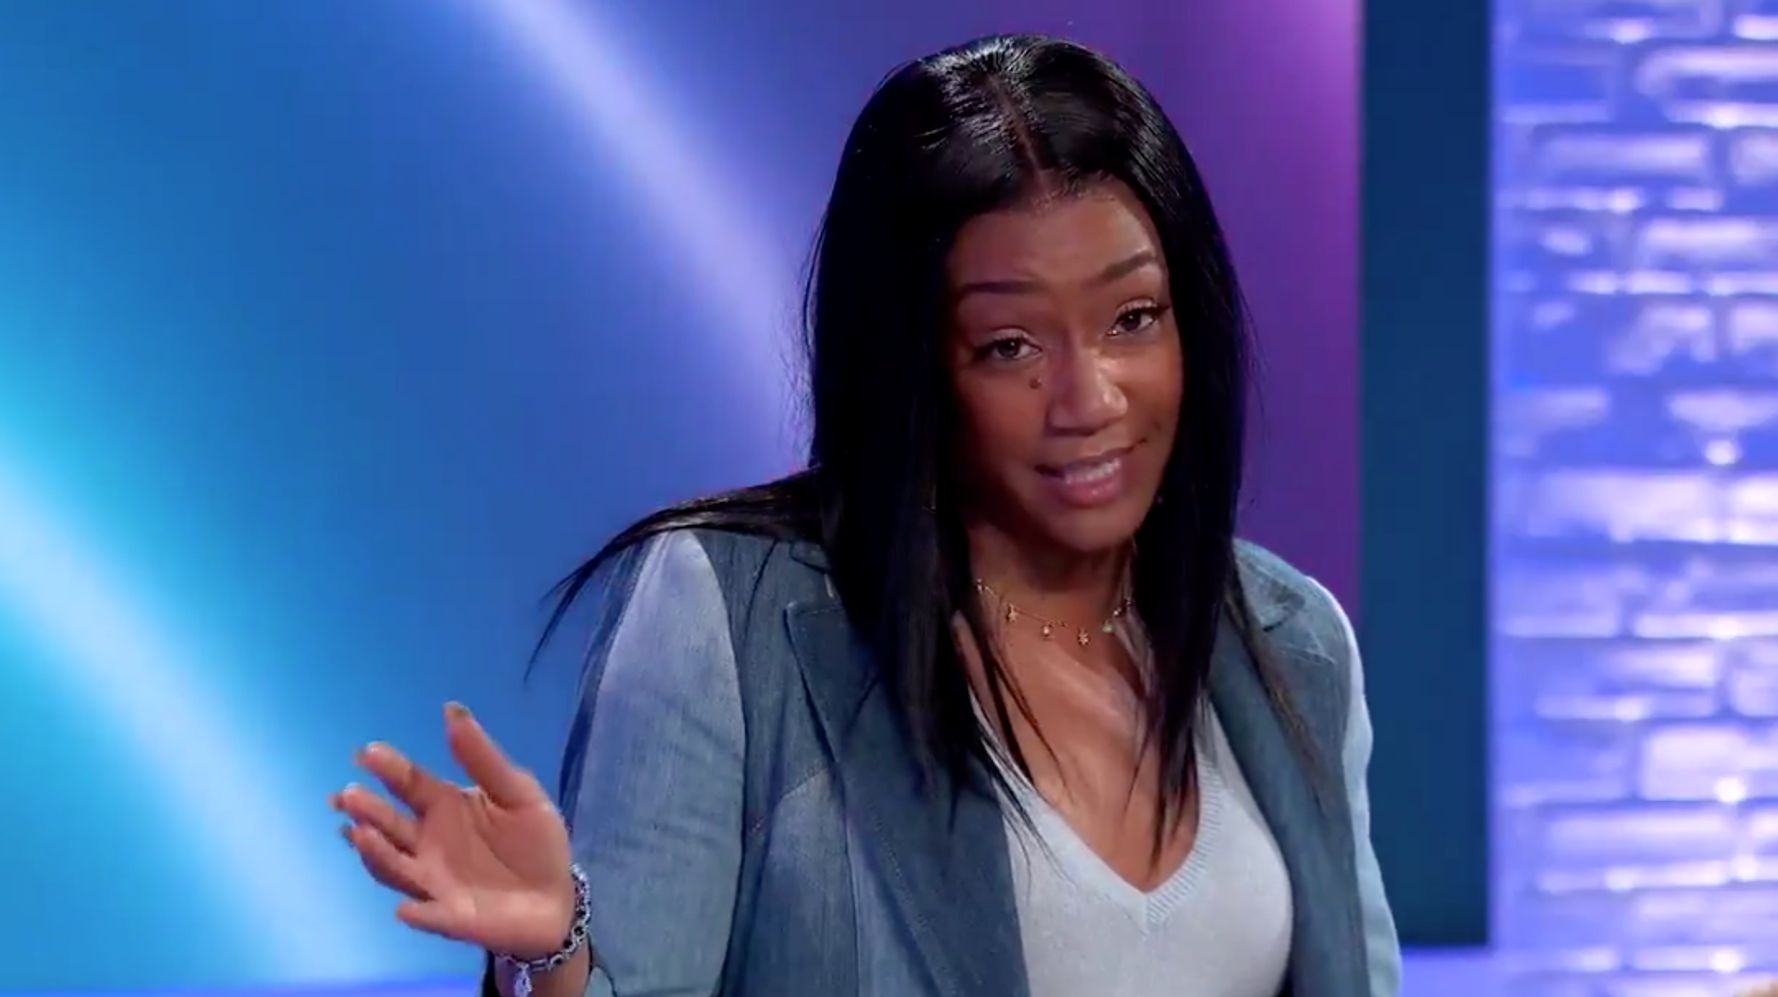 Tiffany Haddish: Finding out that you won a Grammy is priceless.